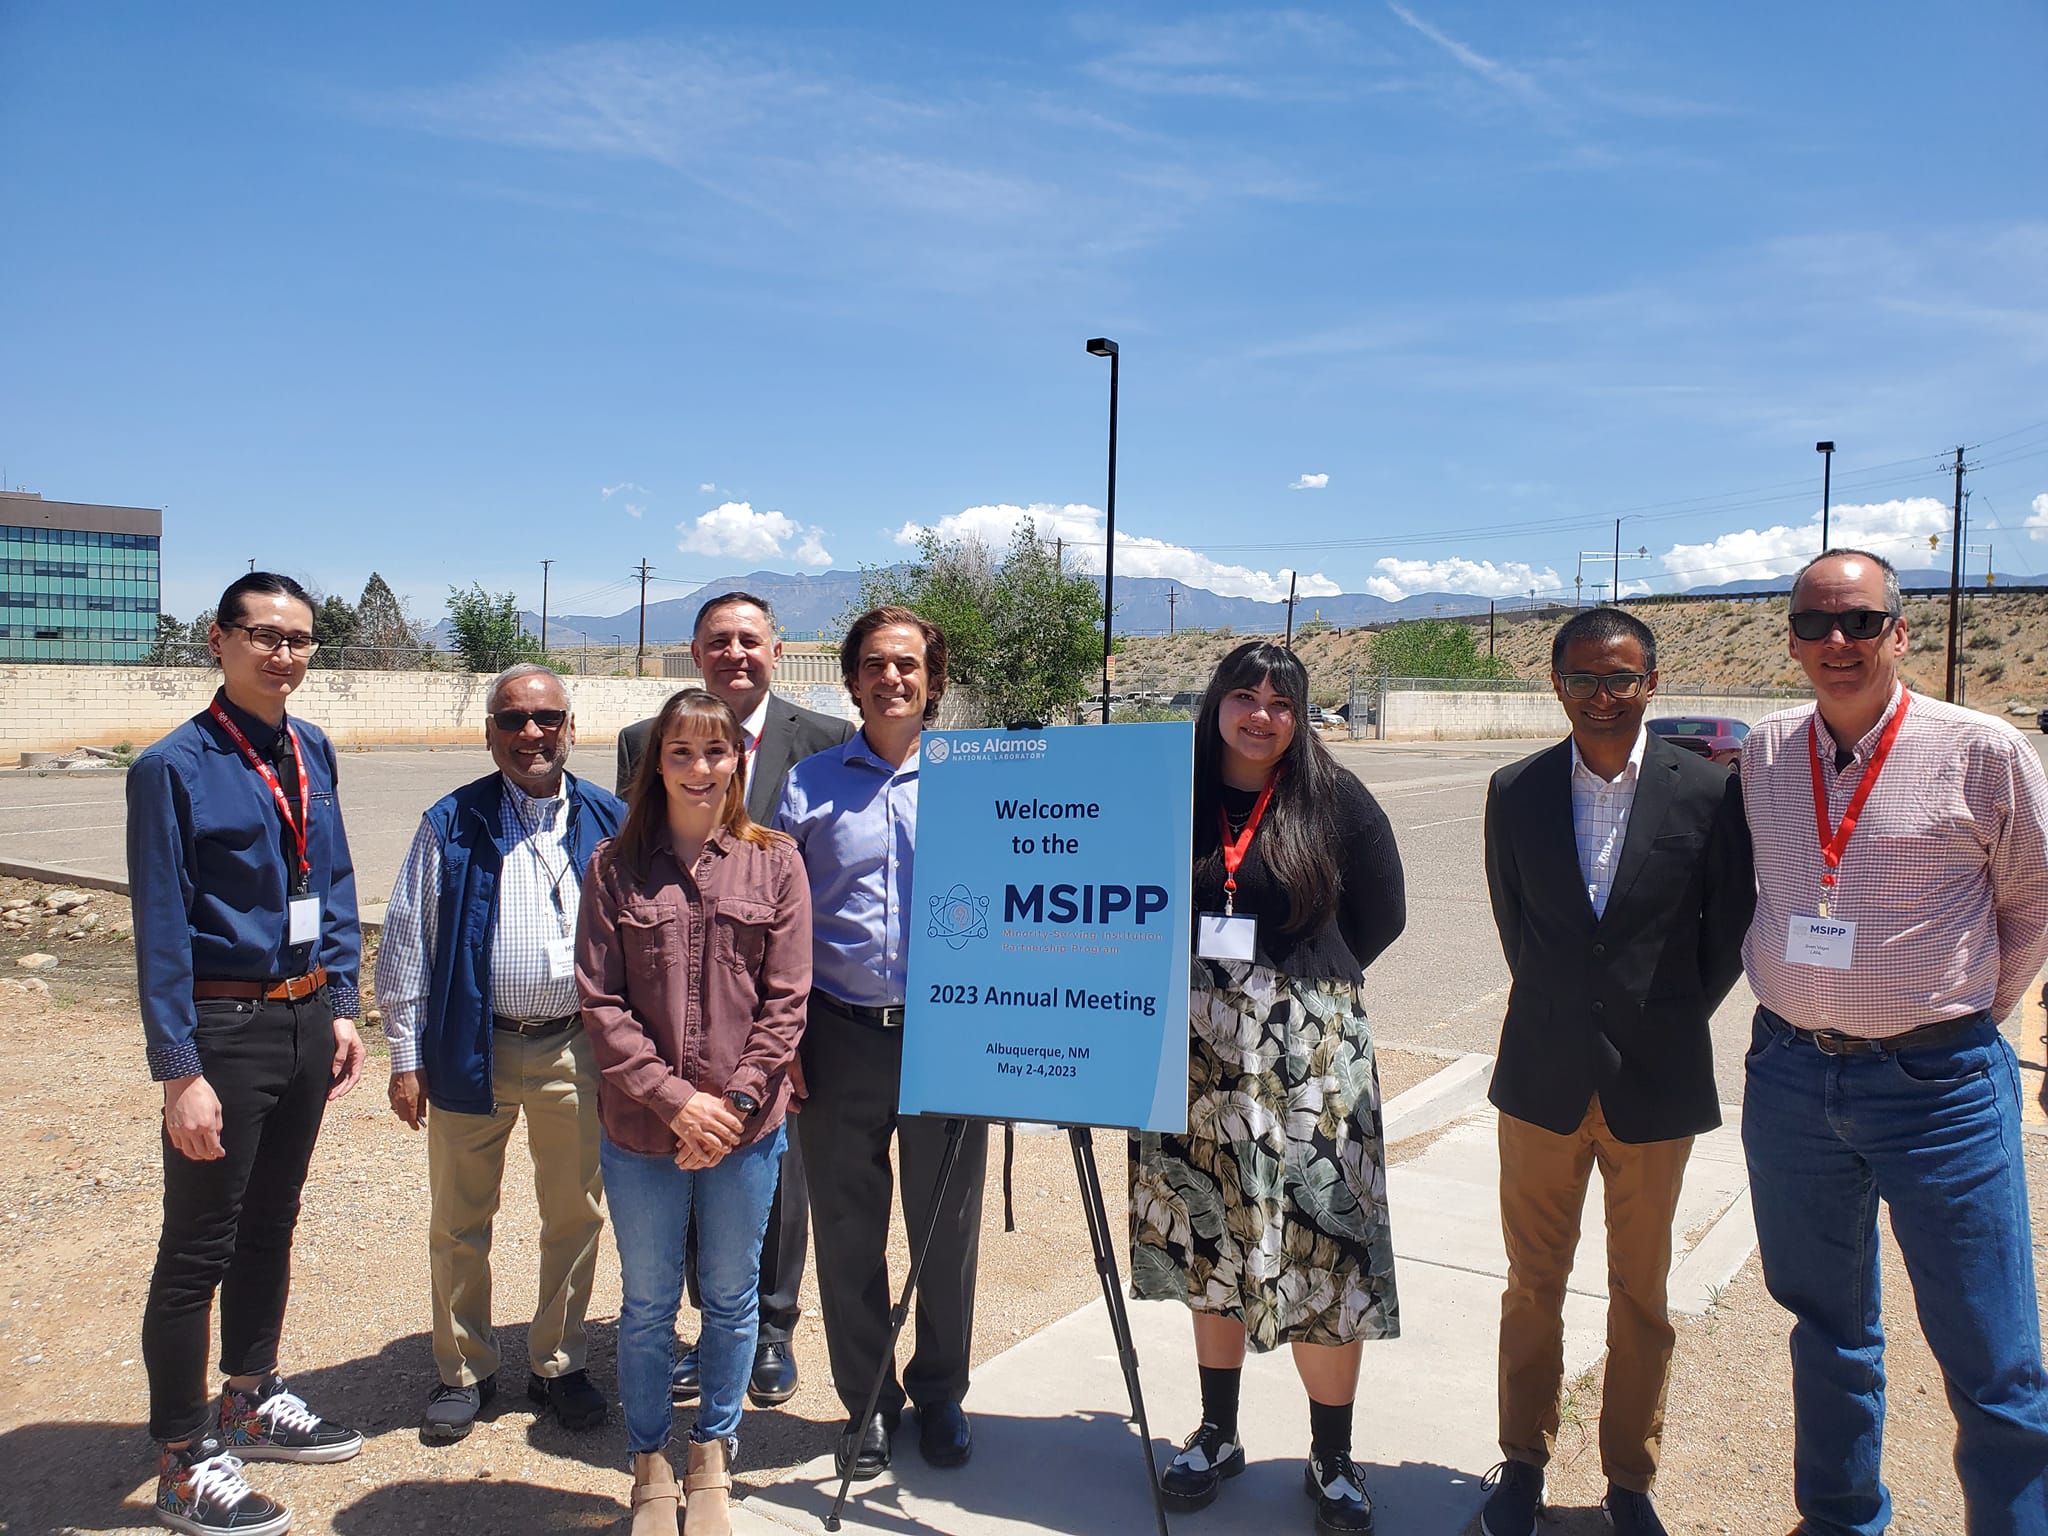 photo: Members of the Minority Serving Institutions Partnership Program met in Albuquerque earlier this month, and members of the Grande CARES consortium presented some of their work so far.